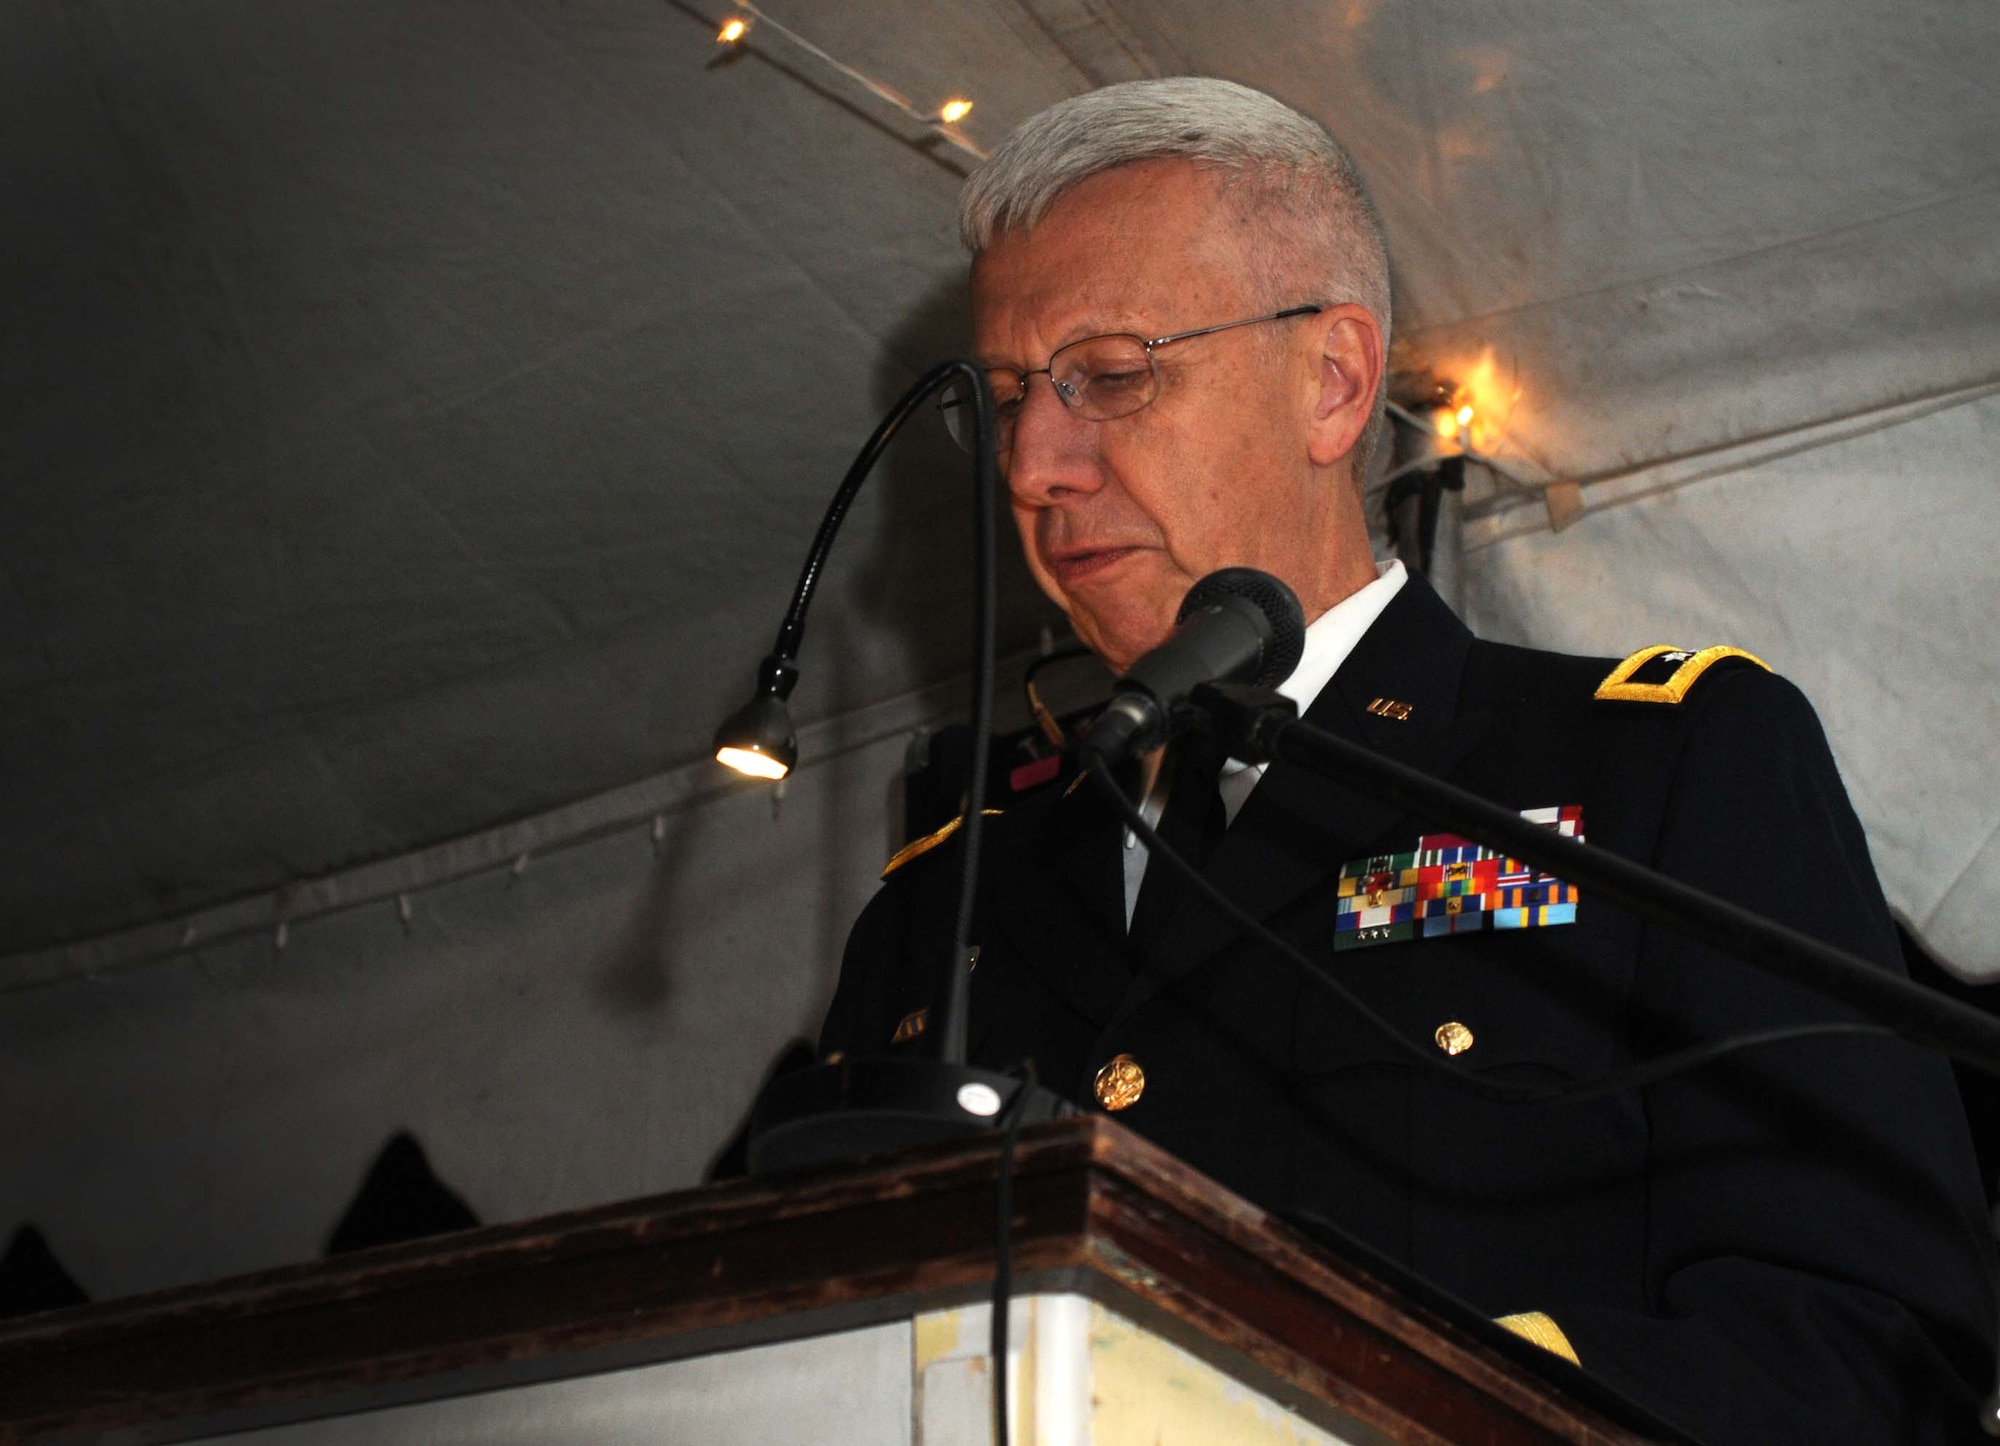 Retired Maj. Gen. Wesley Craig, formerly The Adjutant General of the Pennsylvania National Guard, gives a speech after receiving the Mary G. Roebling Distinguished Service Award during the closing ceremonies of the Association of the United States Army regional meeting sponsored by the William Penn Chapter of the AUSA, Washington Crossing Historic Park, Washington Crossing, Pennsylvania on May 16, 2015. Craig has worn the Army uniform for nearly 50 years prior to retiring this year. (U.S. Air National Guard photo by Tech. Sgt. Andria Allmond/Released)